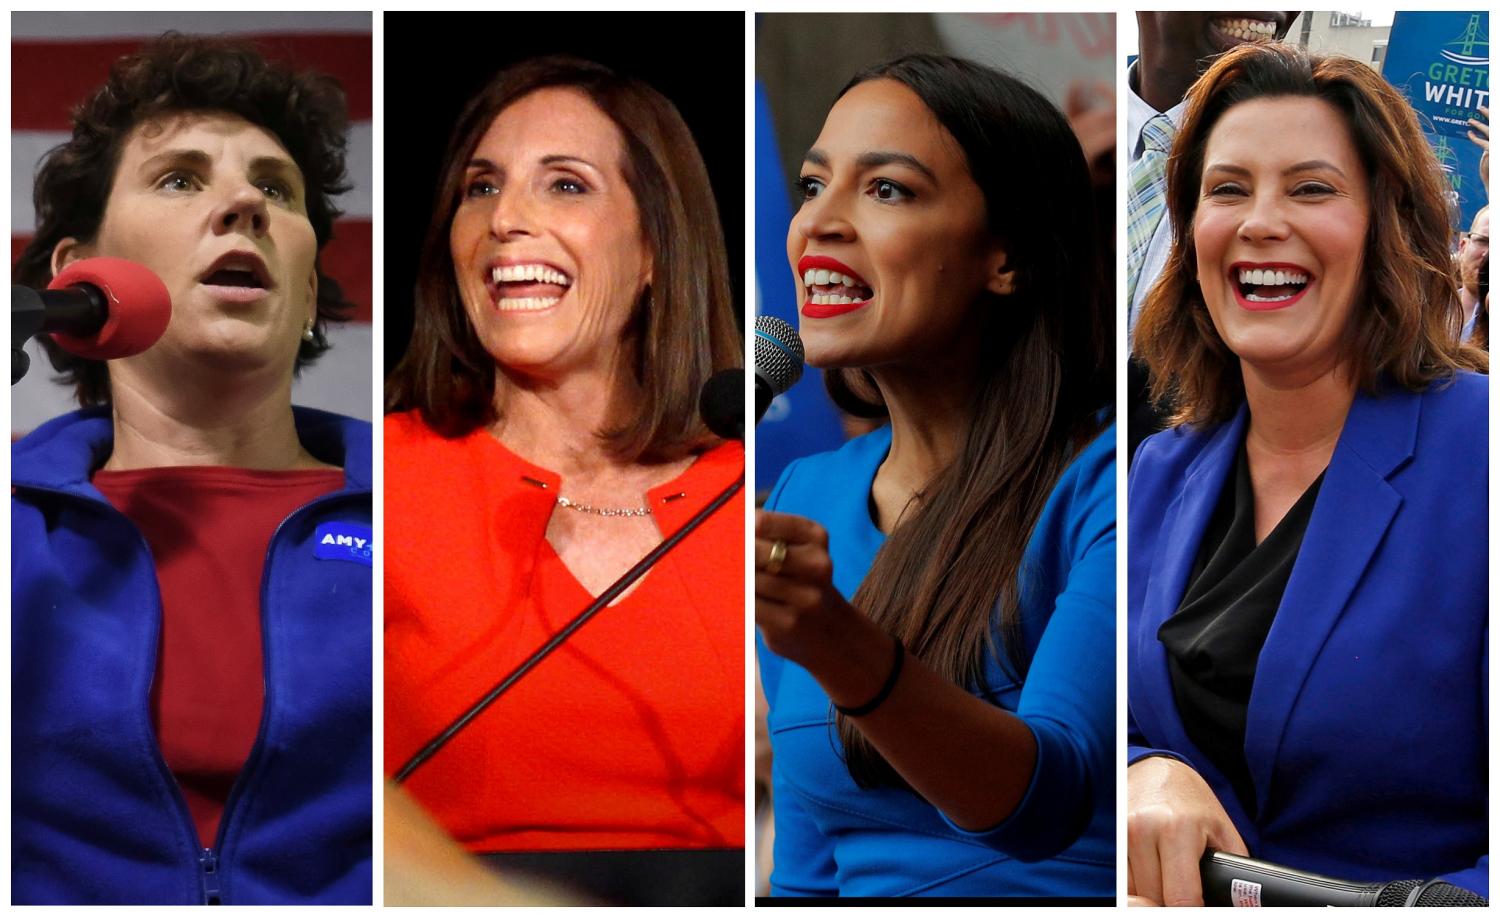 FILE PHOTO: L-R: U.S. Democratic congressional candidate Amy McGrath of Kentucky, Republican U.S. Senate candidate Martha McSally of Arizona, Democratic congressional candidate Alexandria Ocasio-Cortez of New York and Democratic candidate for Governor Gretchen Whitmer of Michigan are shown in this combination photo from Reuters files.  REUTERS/File Photos - RC1ADA9D8480